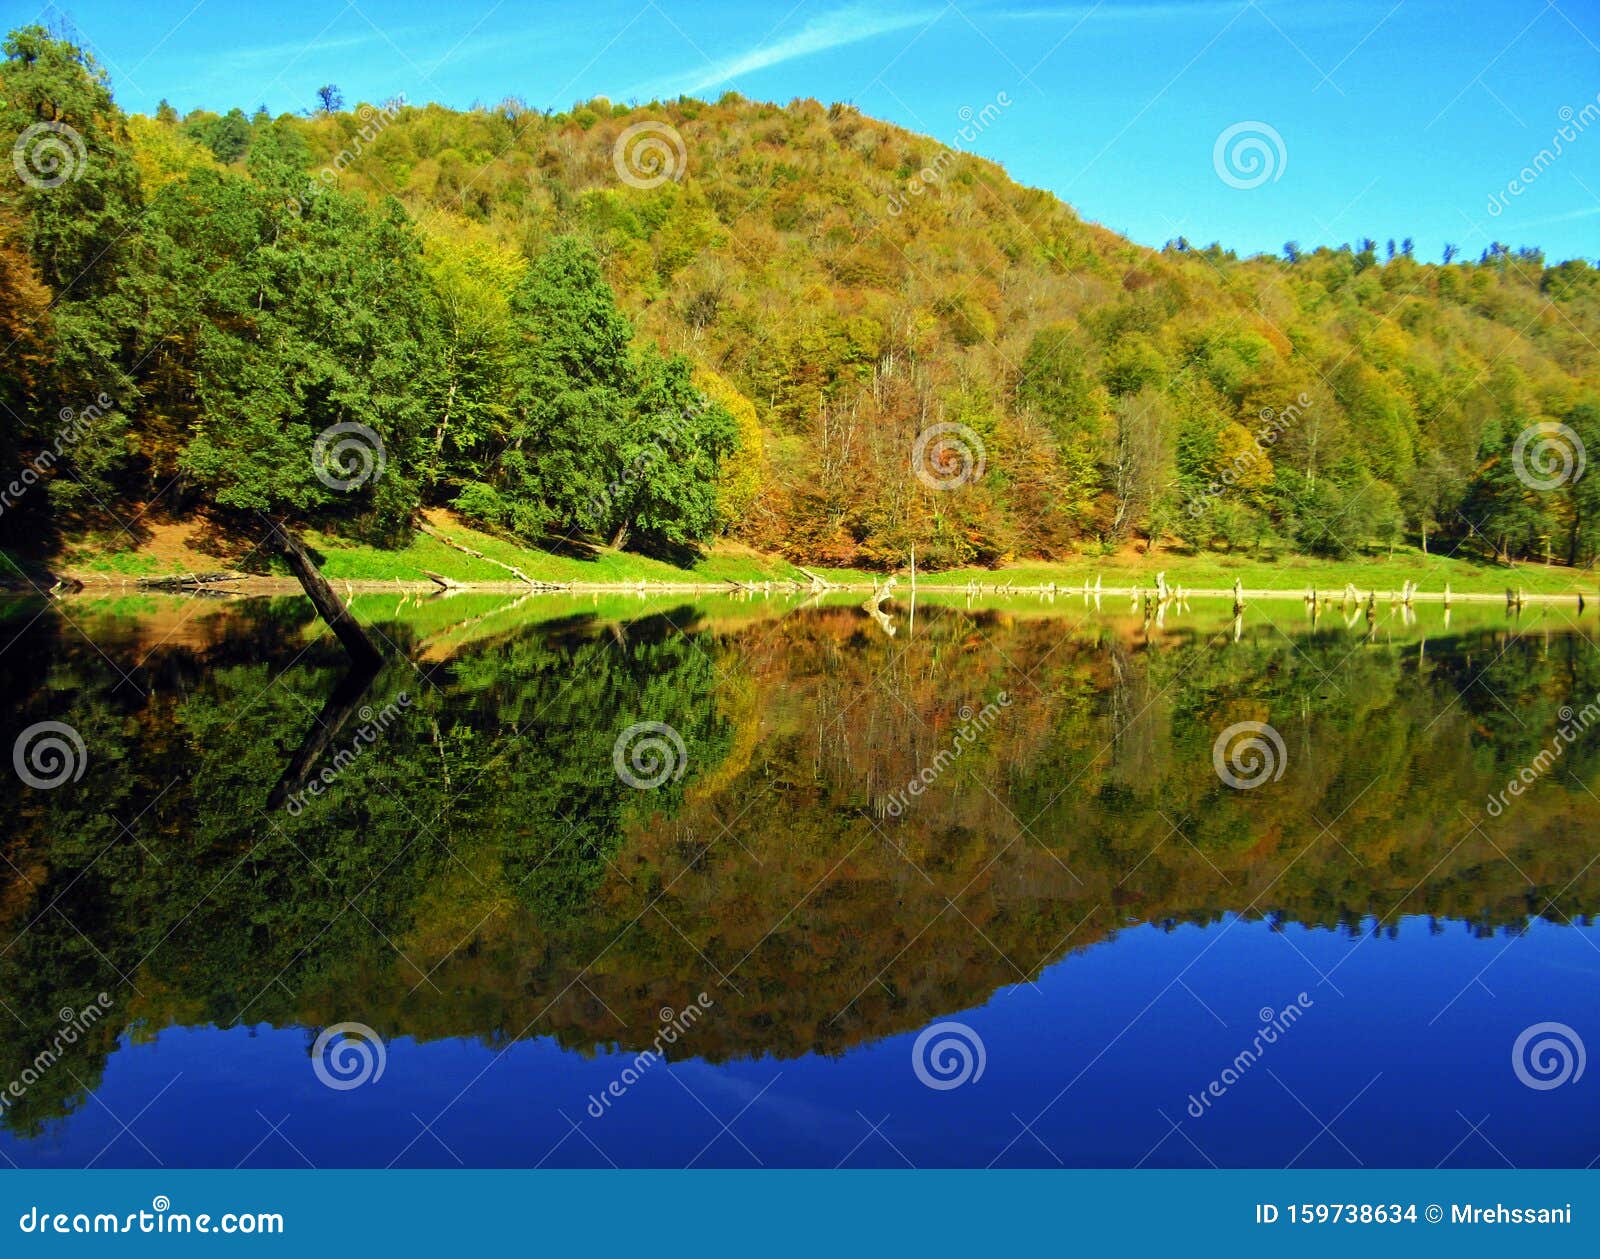 a lake in hyrcanian forests of iran during autumn